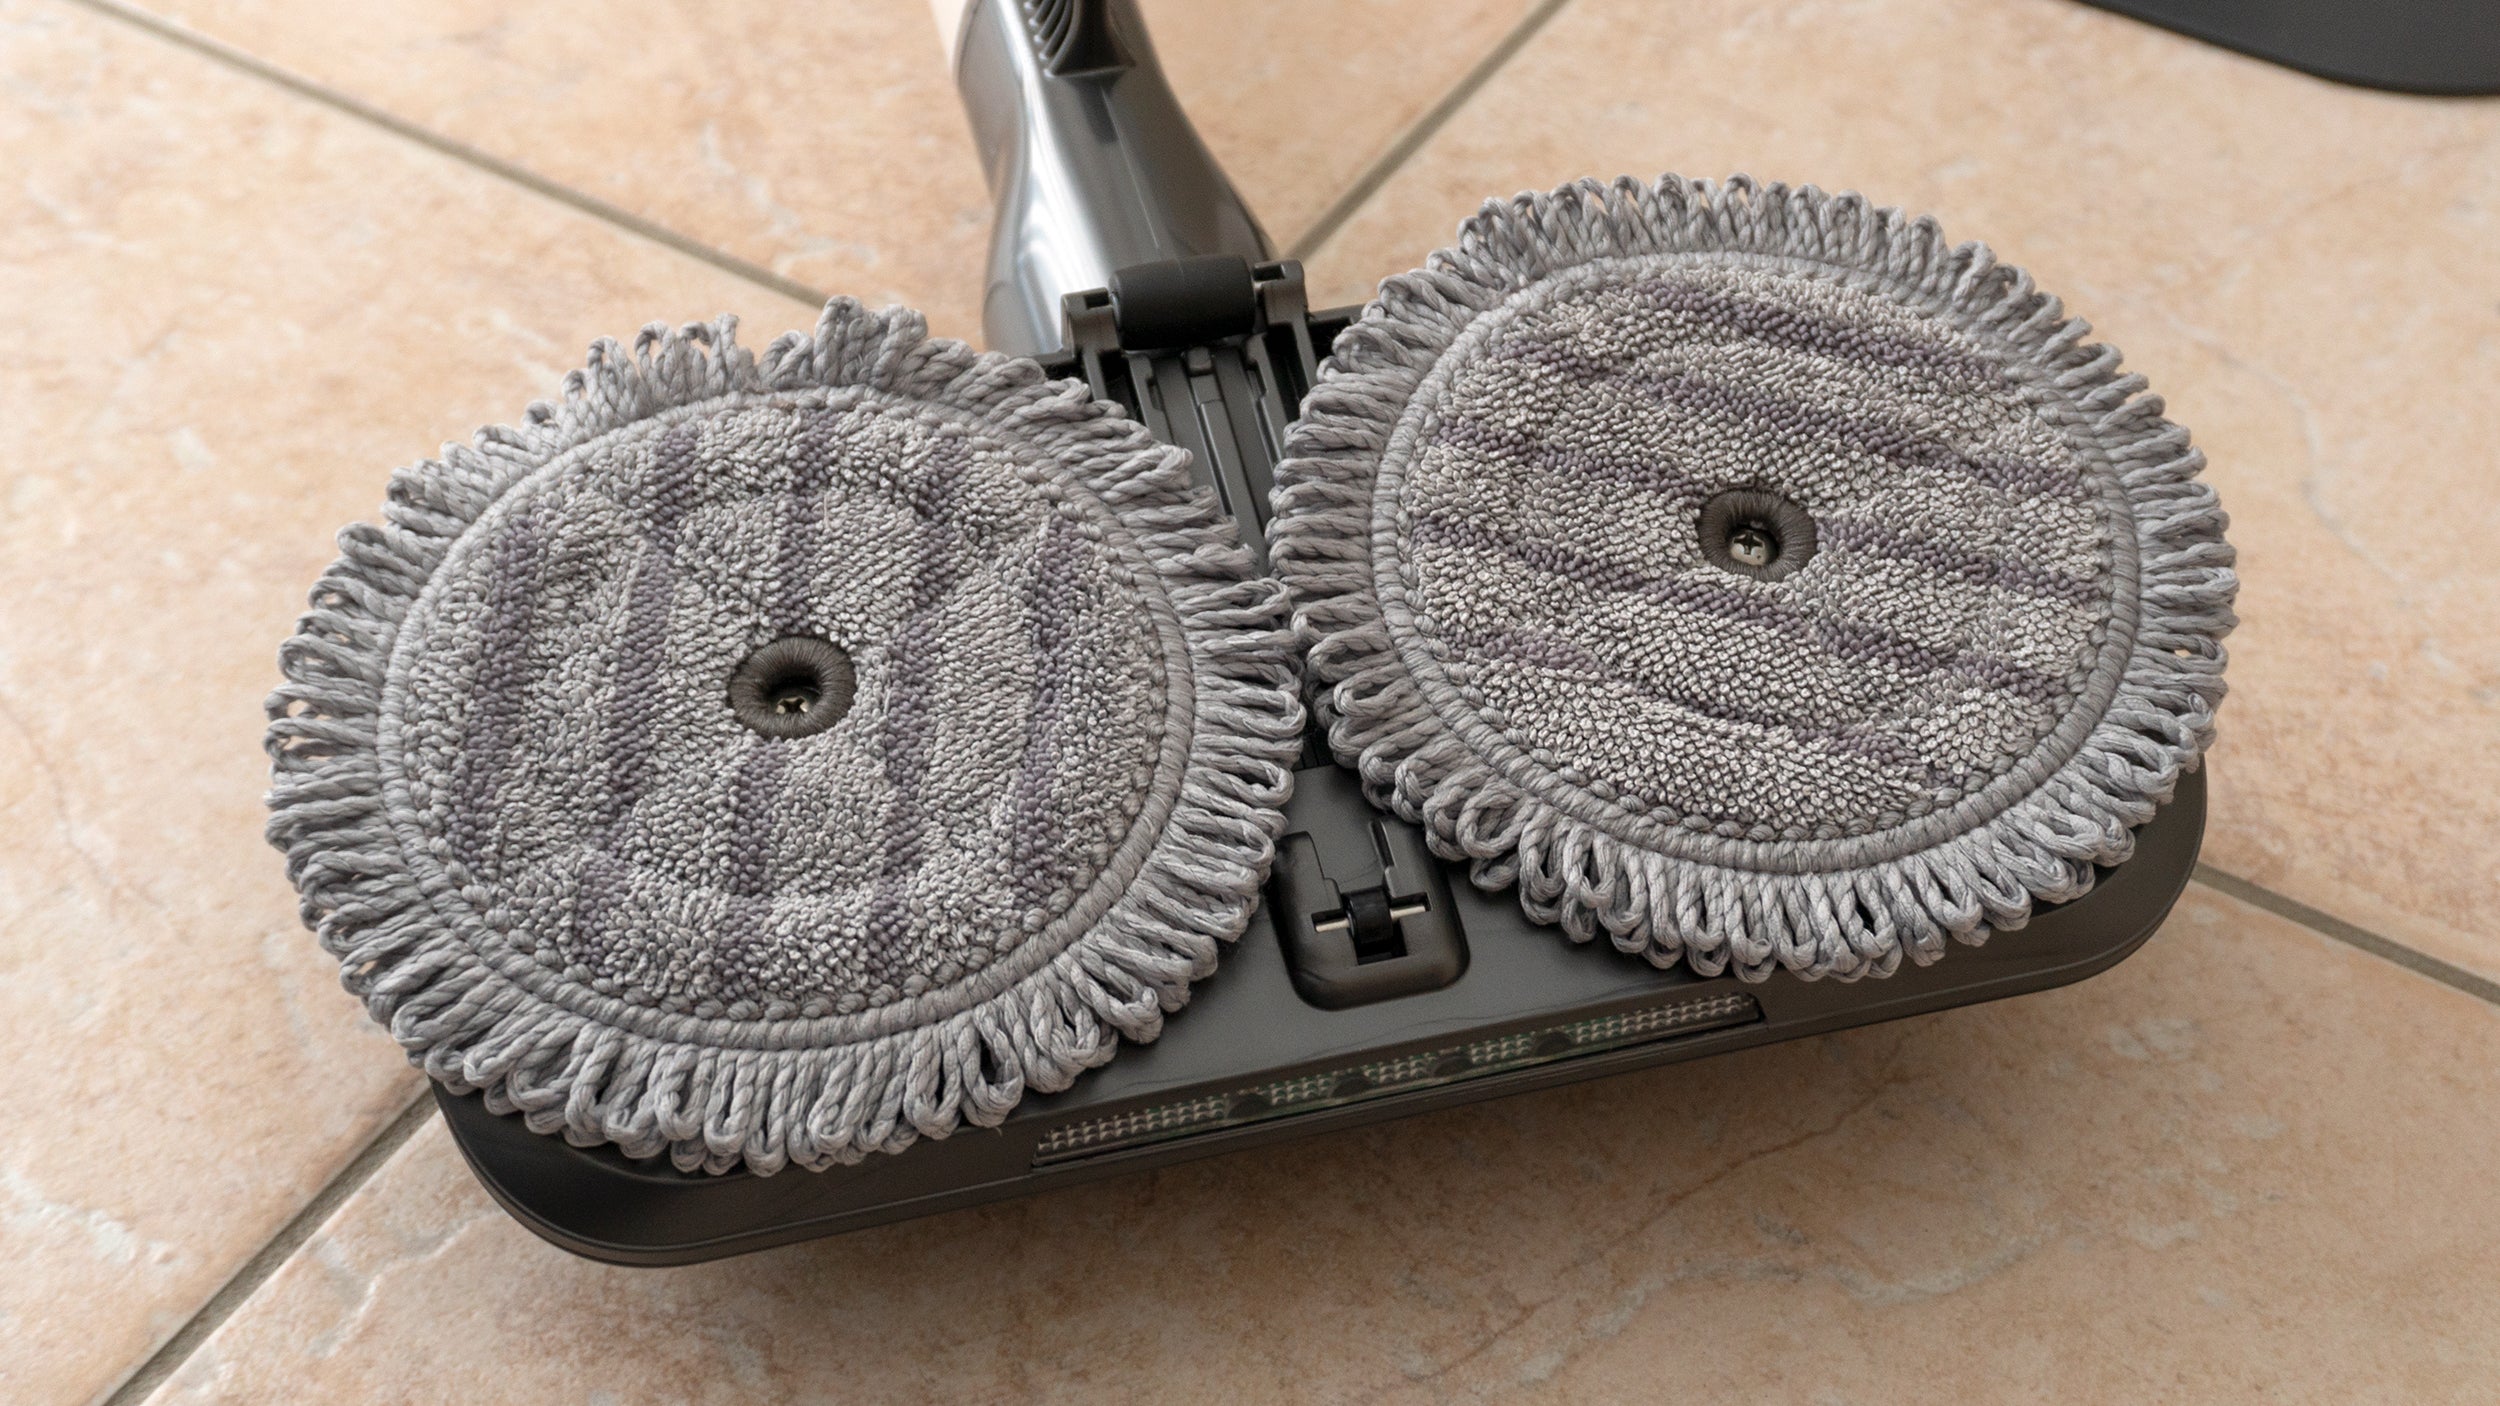 Two spinning pads take the hard work out of mopping floors, but the attachment isn't the most convenient to use, and you can't fill it with soaps or detergents, only water. (Photo: Andrew Liszewski/Gizmodo)